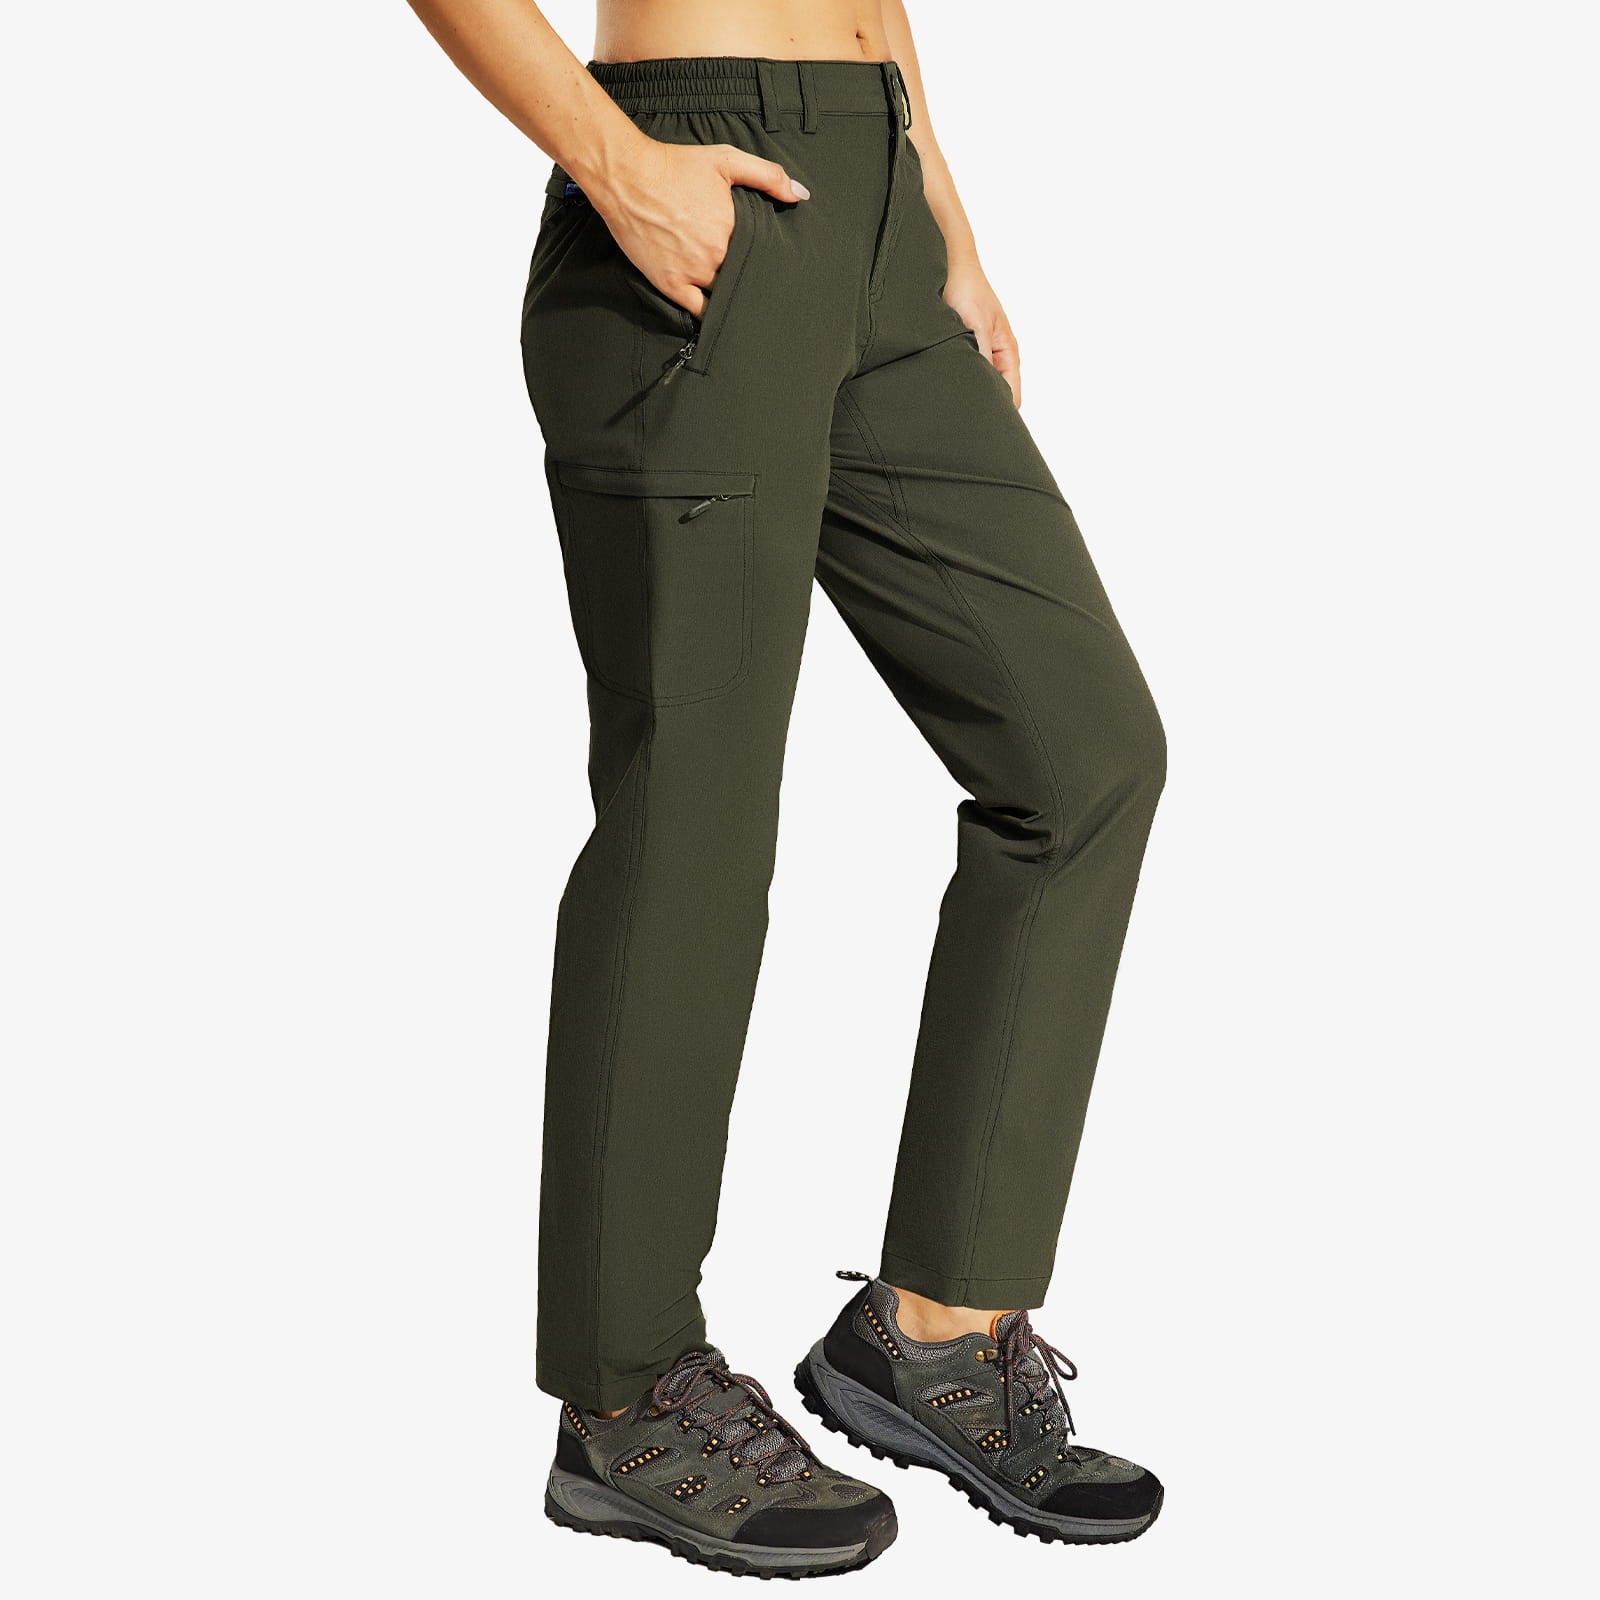 Women's Quick Dry Hiking Cargo Pants with Zip Pockets - Olive Green / XS